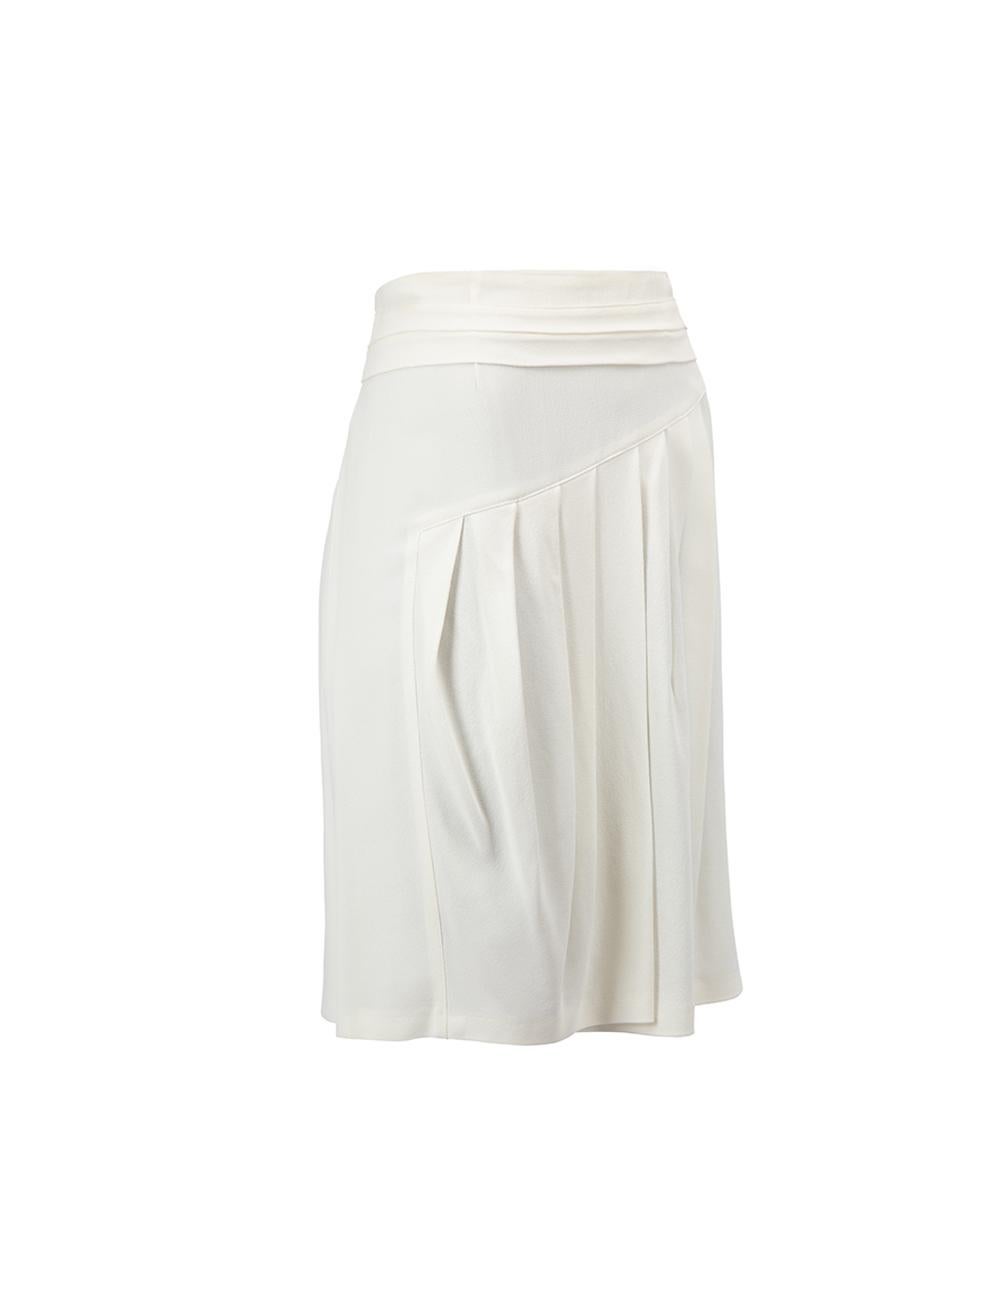 CONDITION is Very good. Minimal wear to skirt is evident. Minimal wear to the right-side of waistband with discoloured markings on this used Christian Dior Boutique designer resale item. 



Details


Cream

Synthetic

Mini skirt

Pleated

Side zip